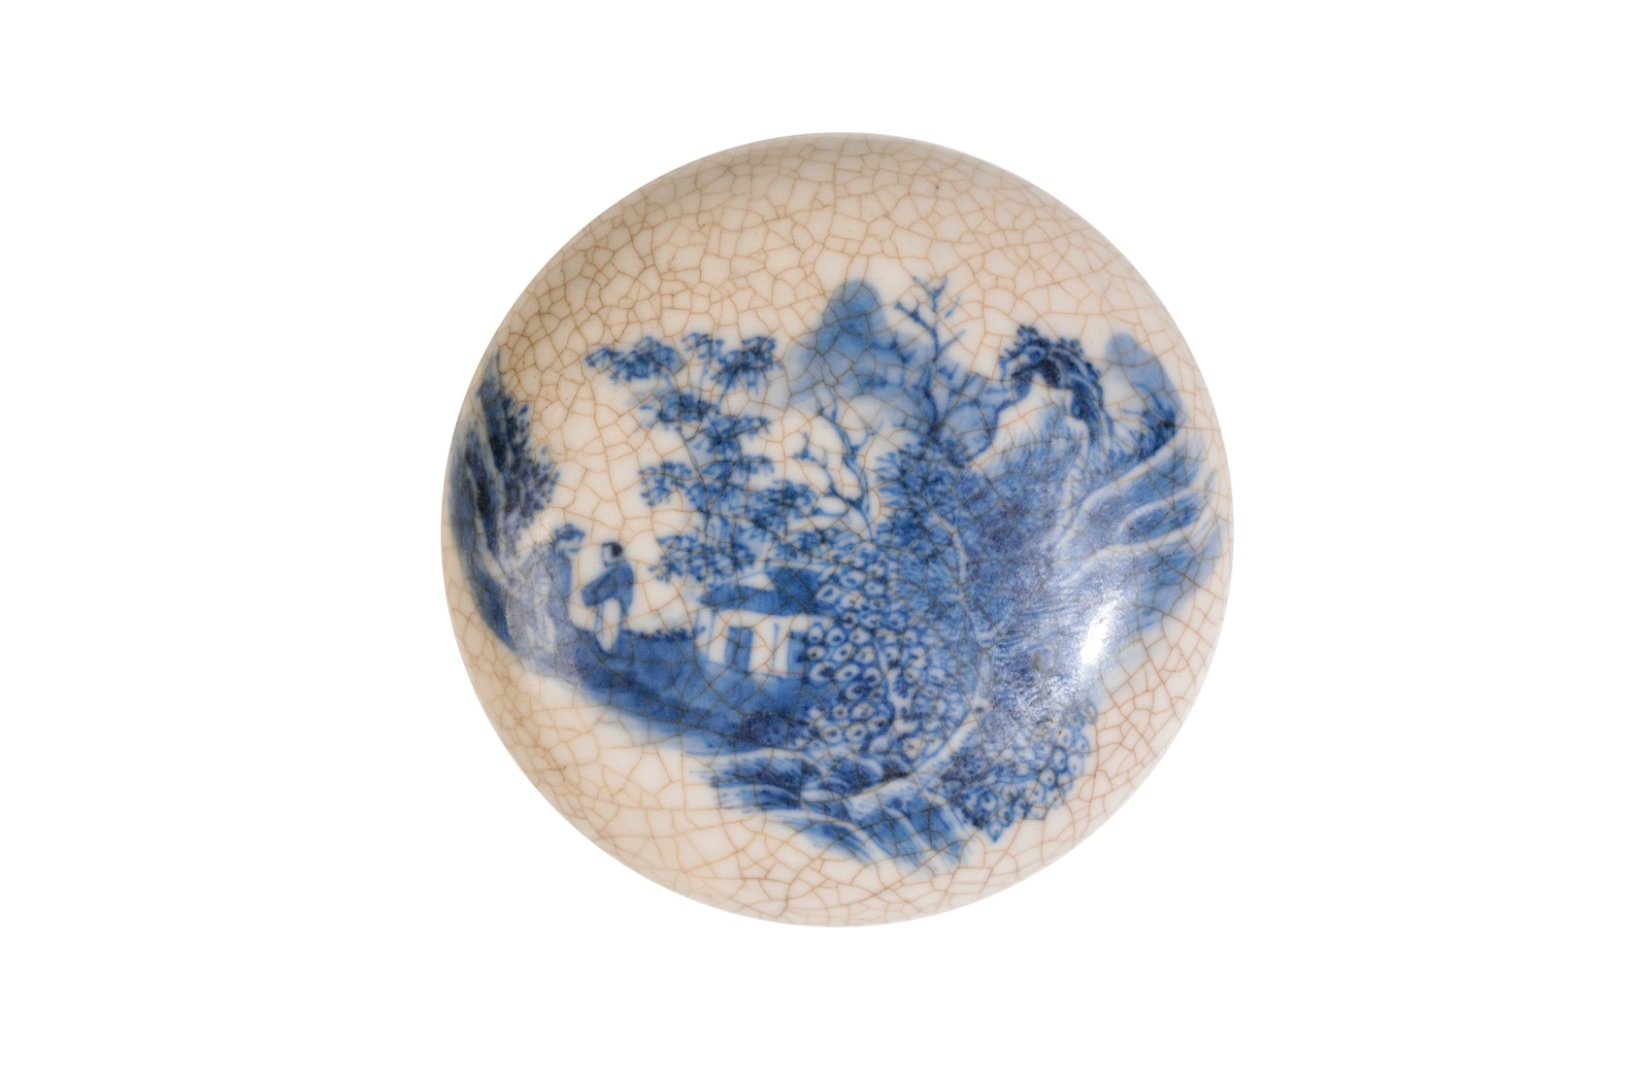 SOFT-PASTE BLUE AND WHITE SEAL PASTE BOX, QING DYNASTY